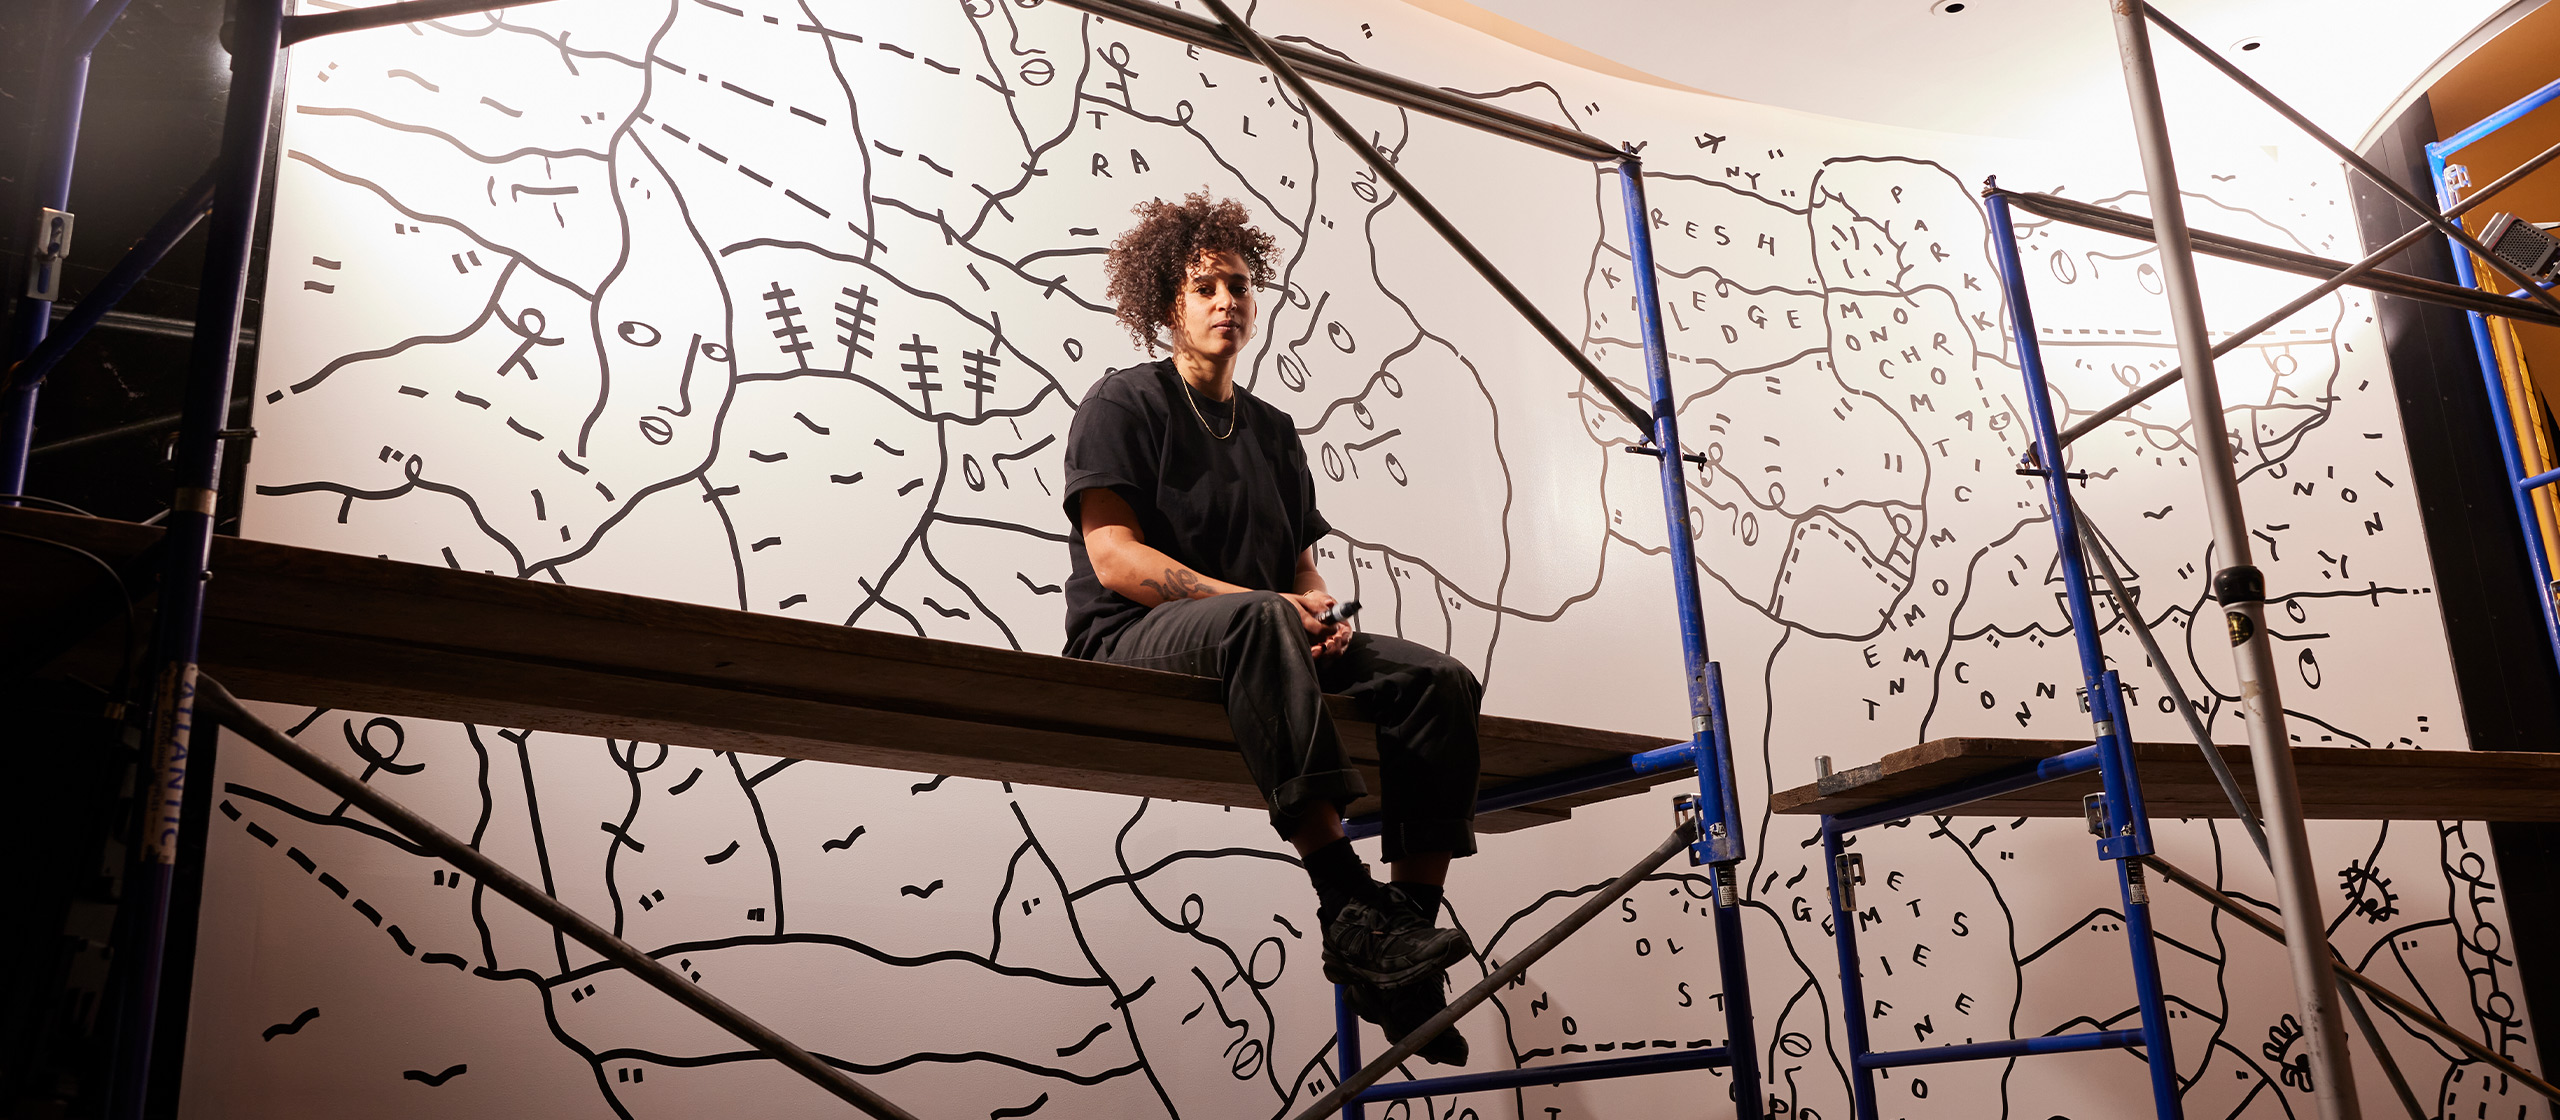 A person with curly hair sits on a scaffold, working on a large mural featuring abstract black lines and shapes on a white background. The mural covers a curved wall and scaffolding surrounds the person. They're wearing a black shirt and pants, focused on their work.